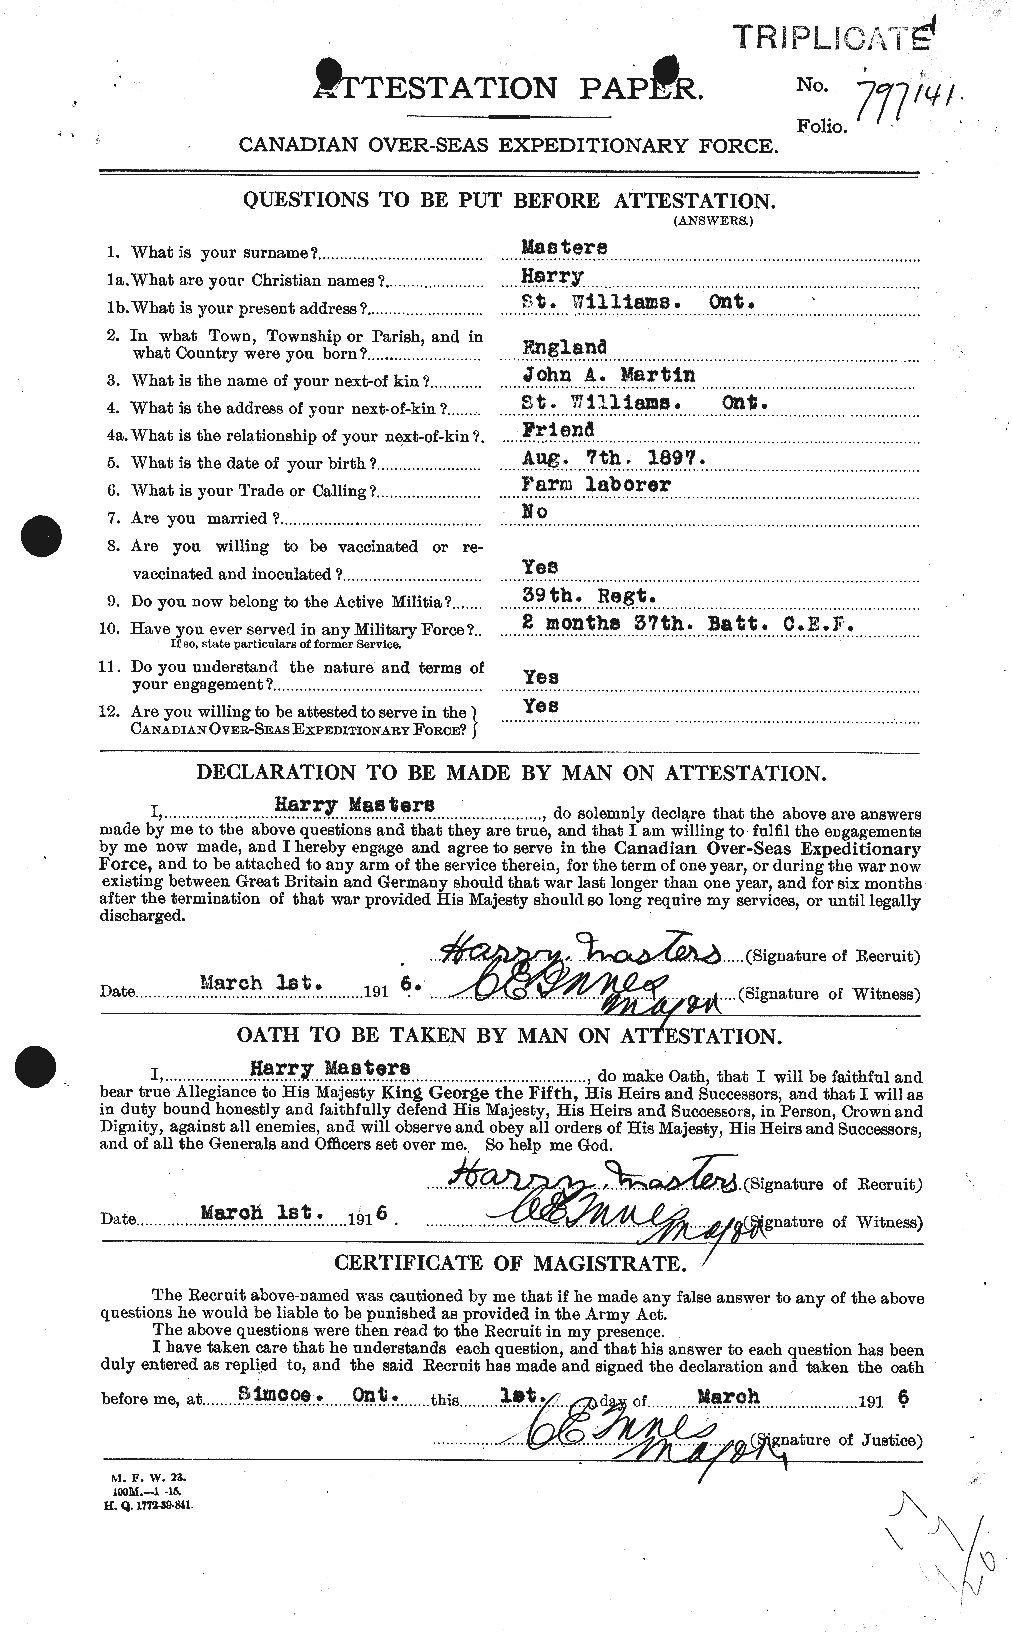 Personnel Records of the First World War - CEF 487336a